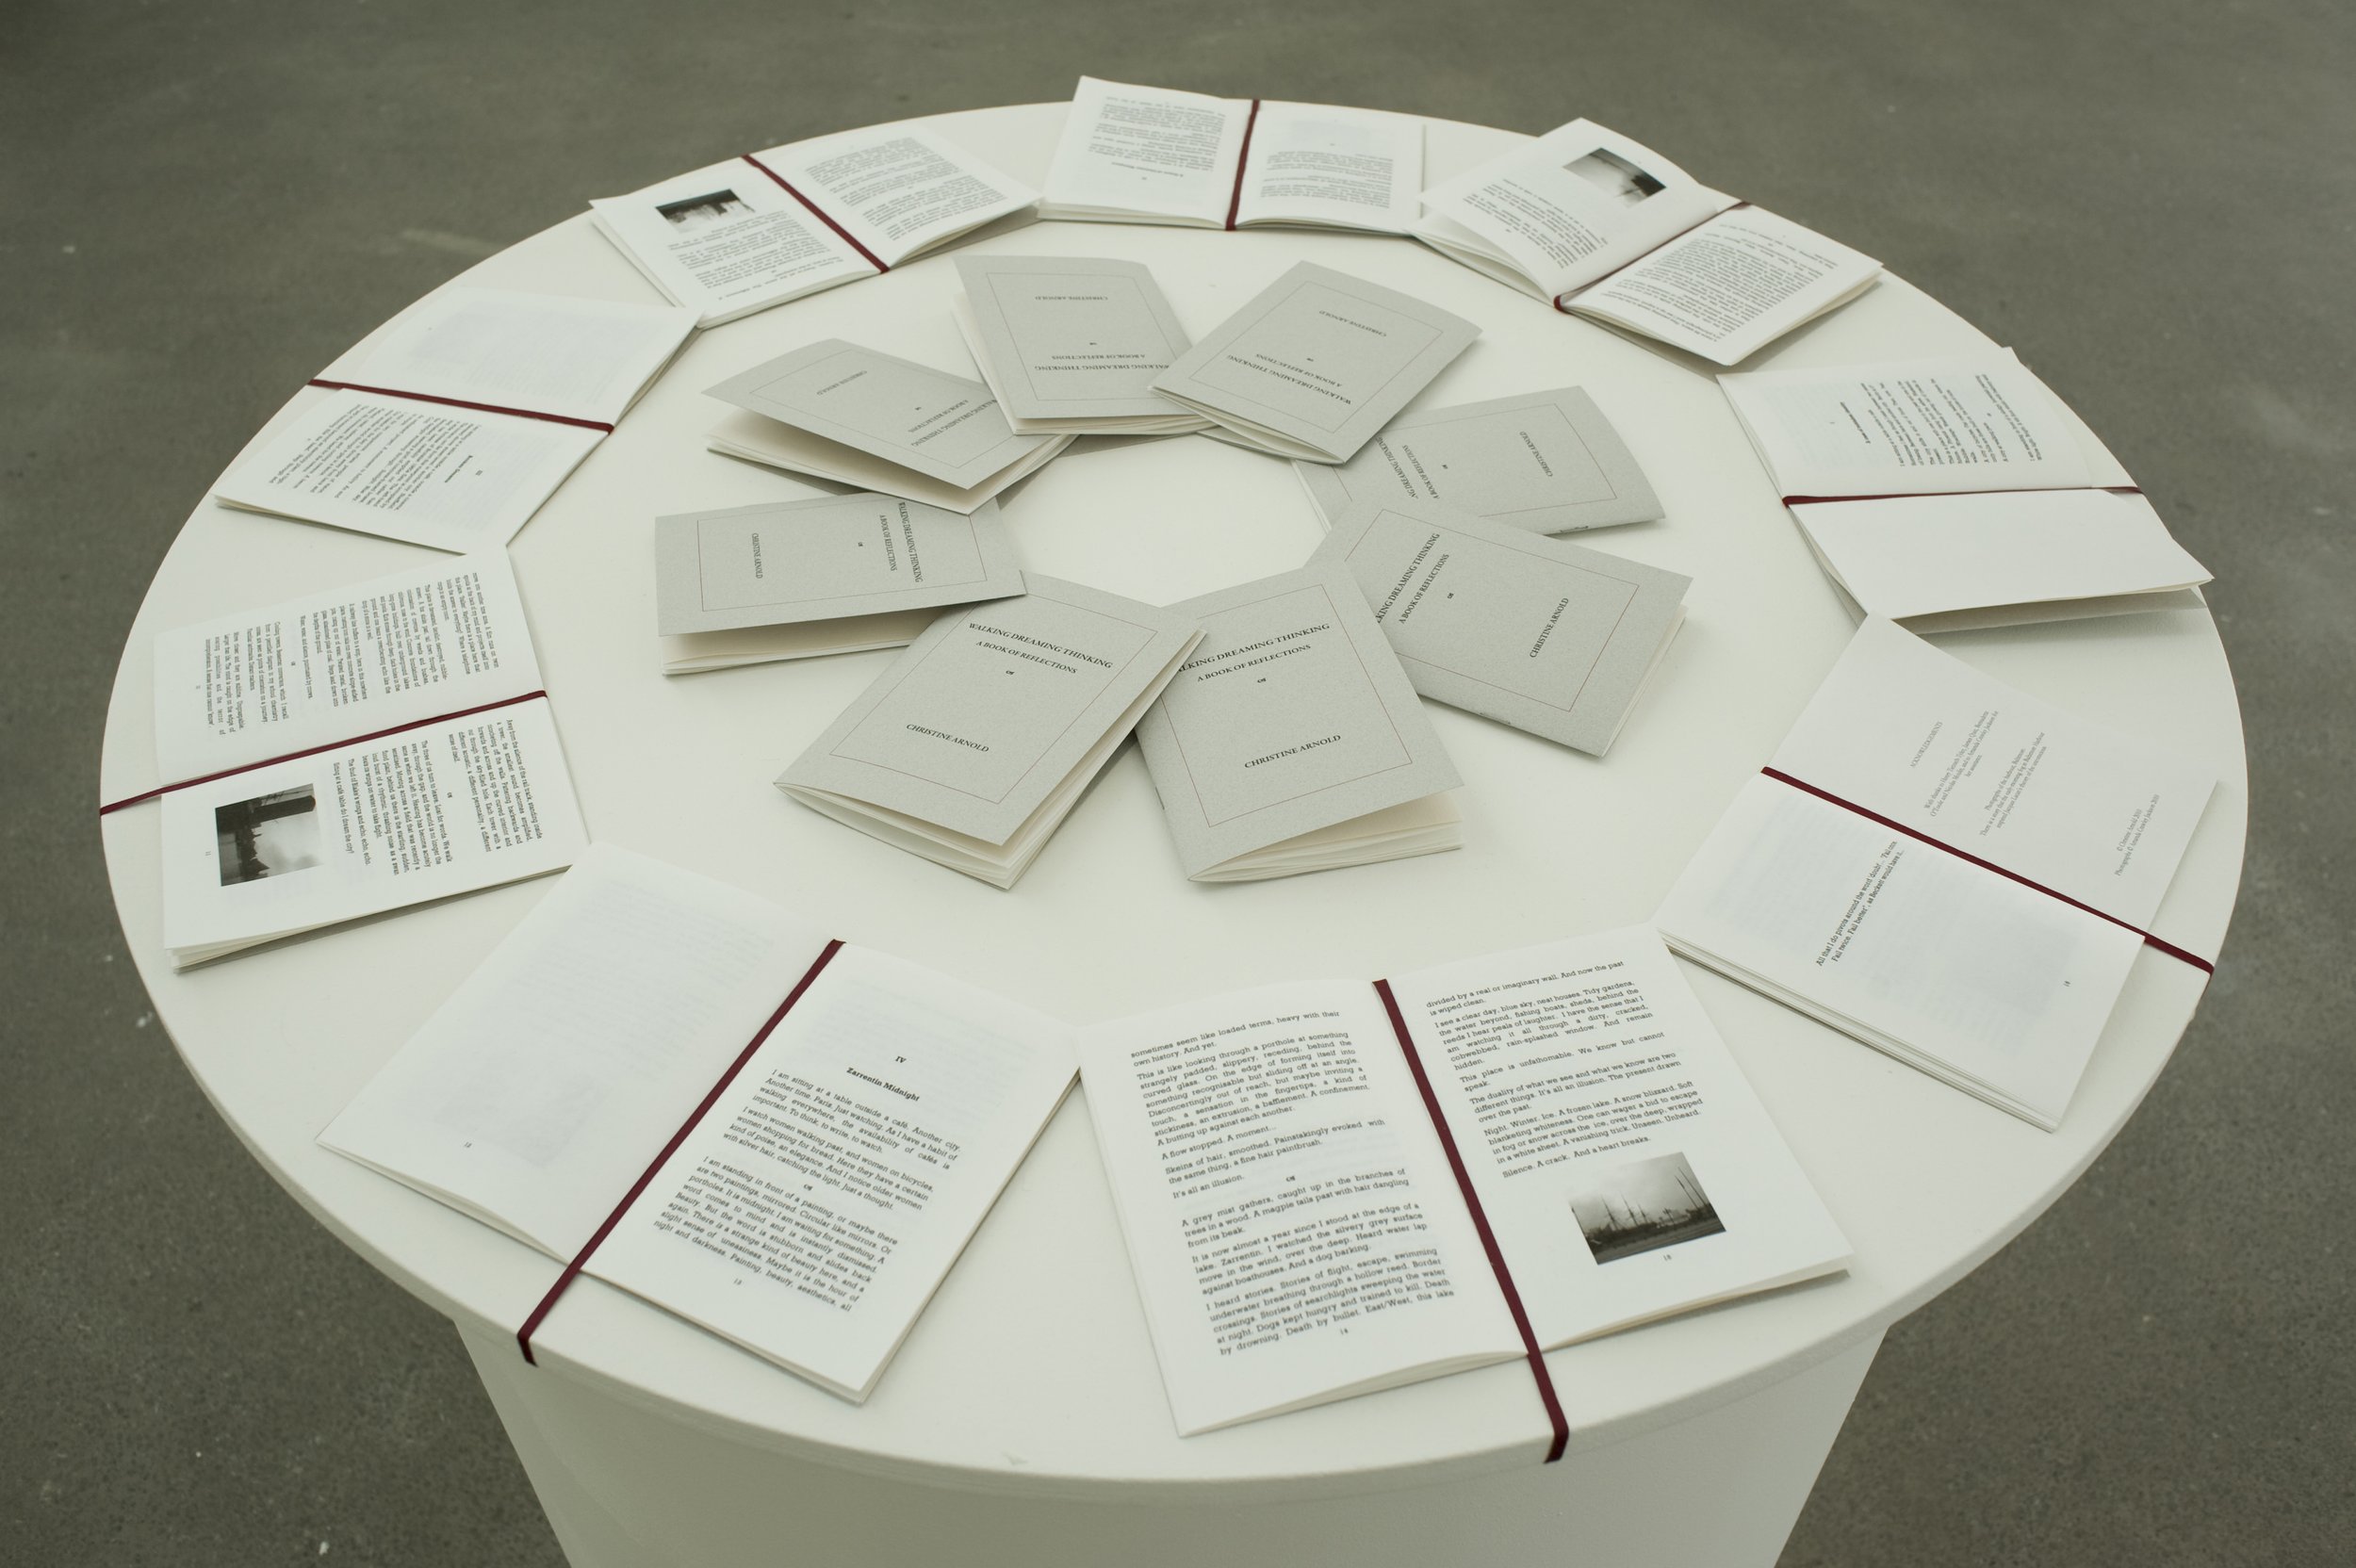  Image of circular plinth displaying Christine Arnold’s book,  Walking, Dreaming, Thinking: A Book of Reflections.   